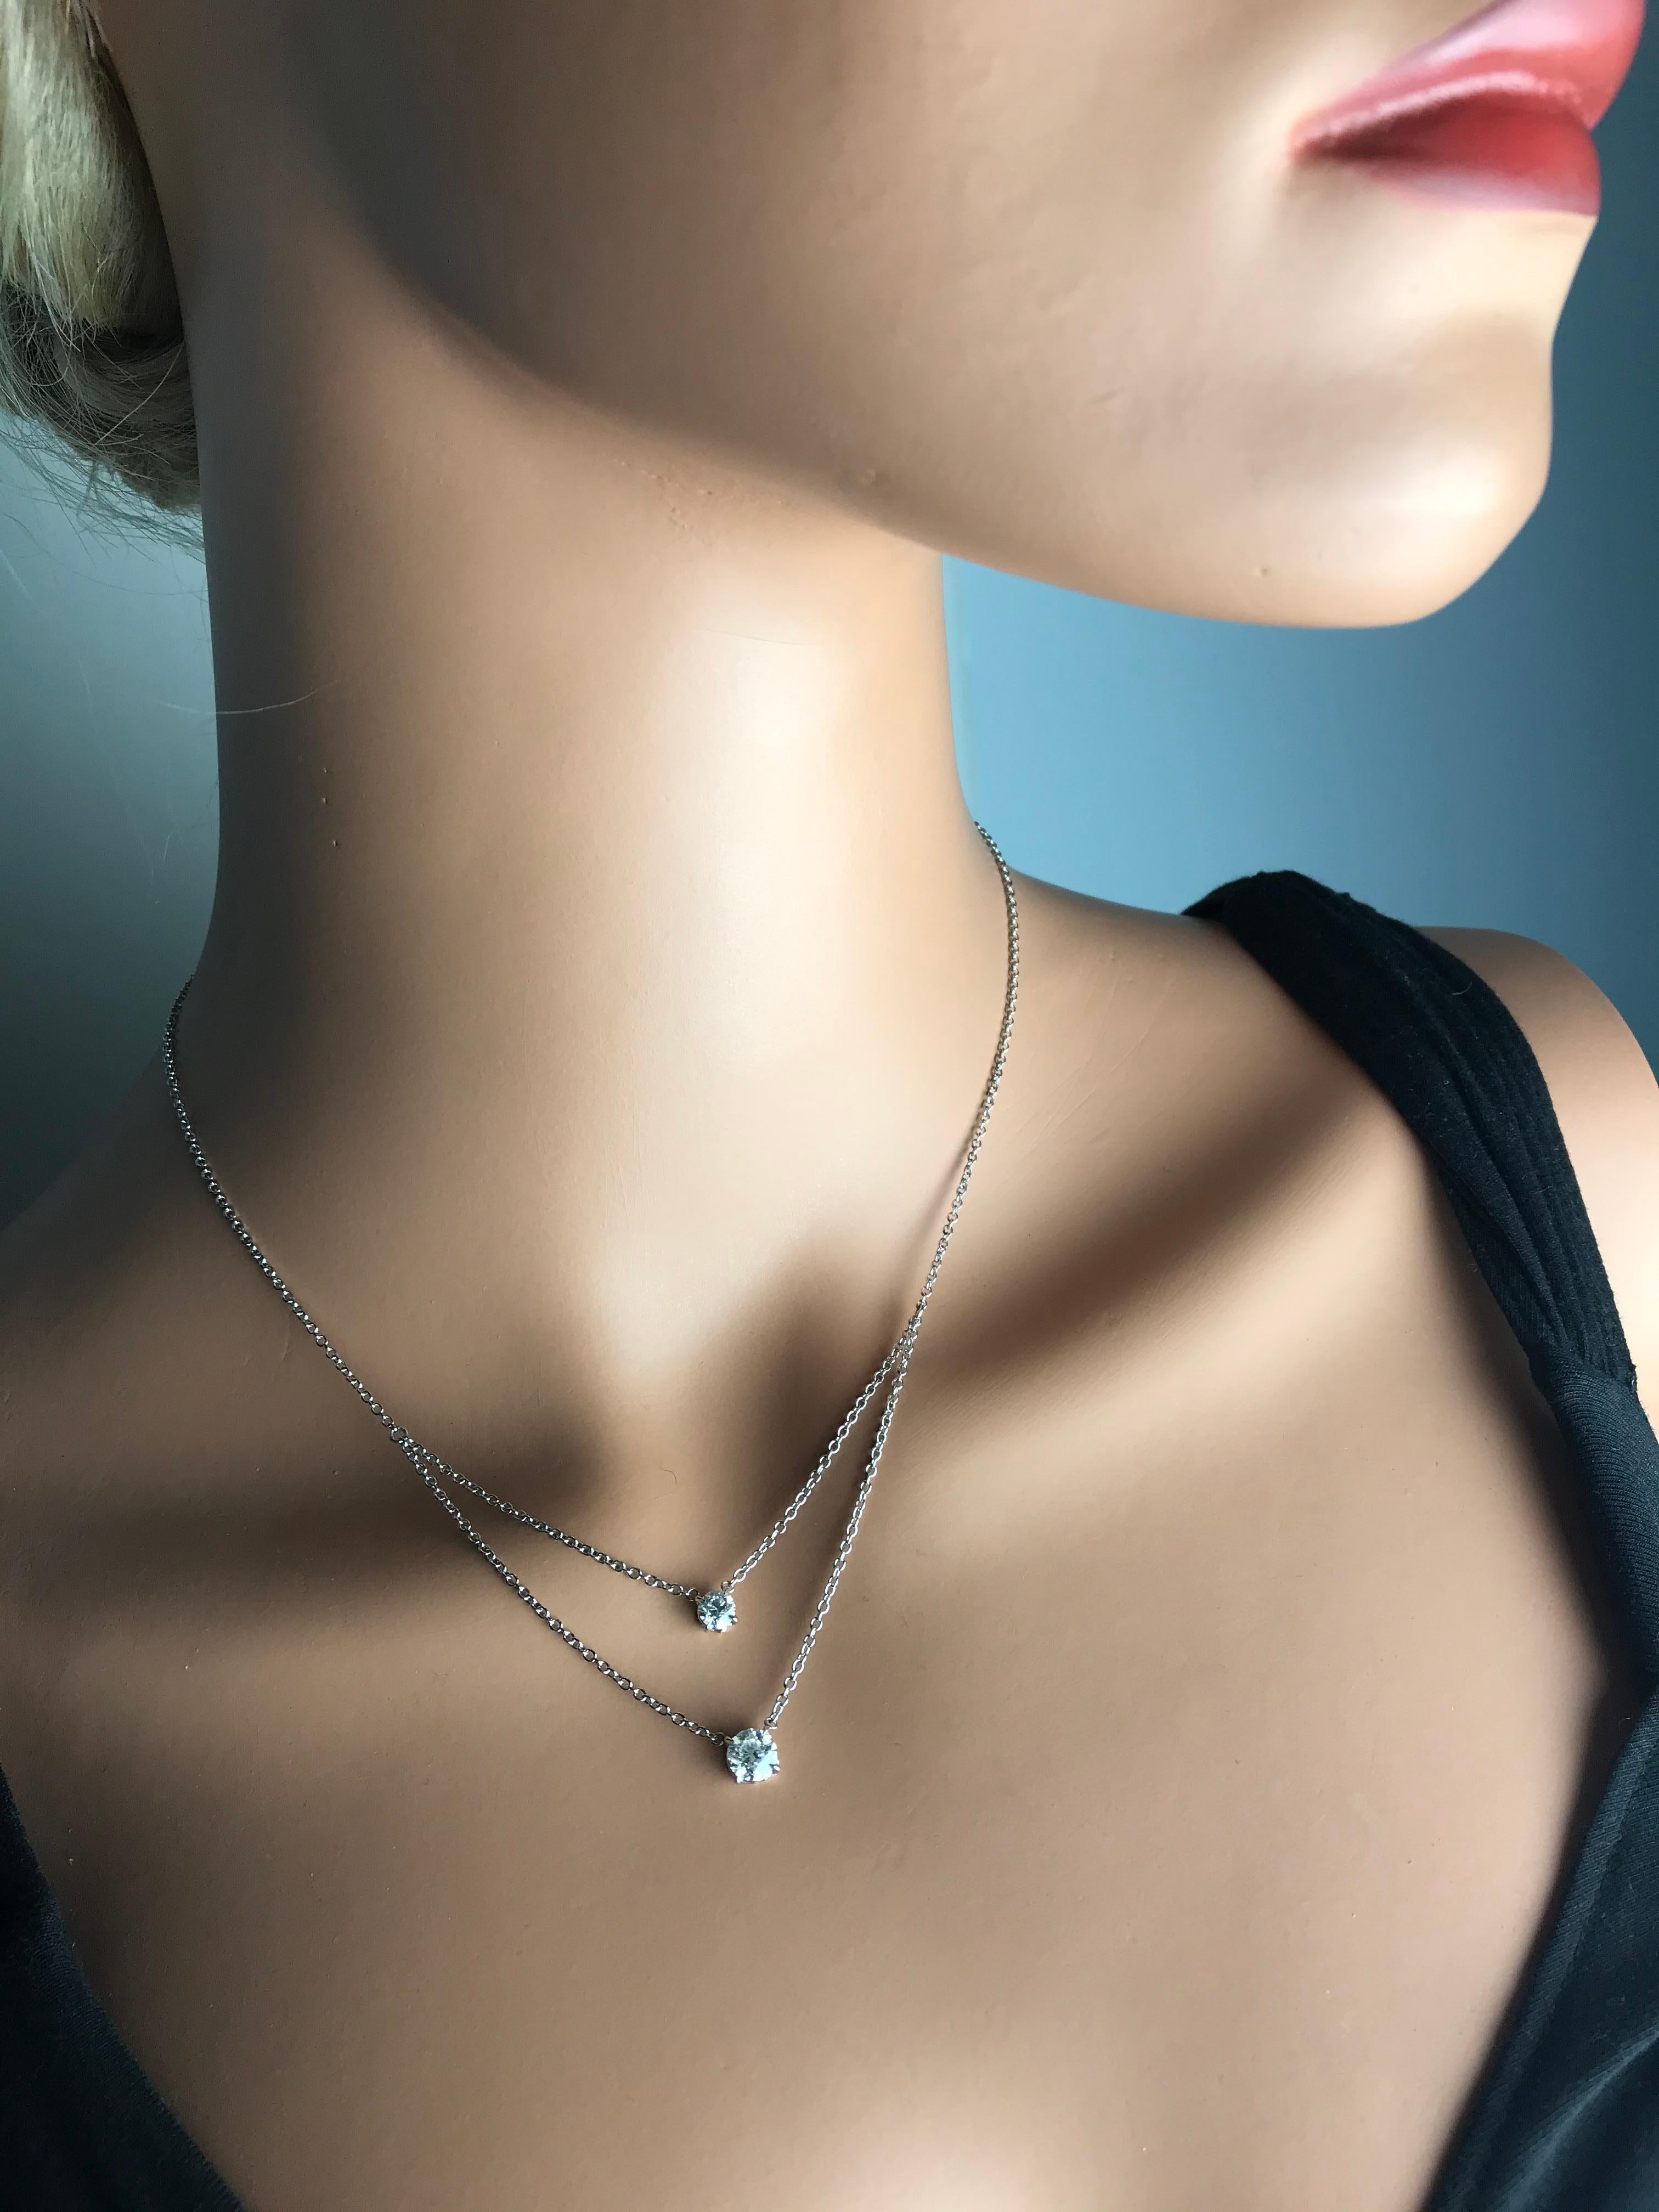 This beautiful diamond drop pendant features two tiers of solitaire diamonds. The larger stone is 0.84 carat, the smaller stone is 0.38 carat. Set in 18k White Gold.

Diamond Town is pleased to offer a variety of Diamond items in all categories.